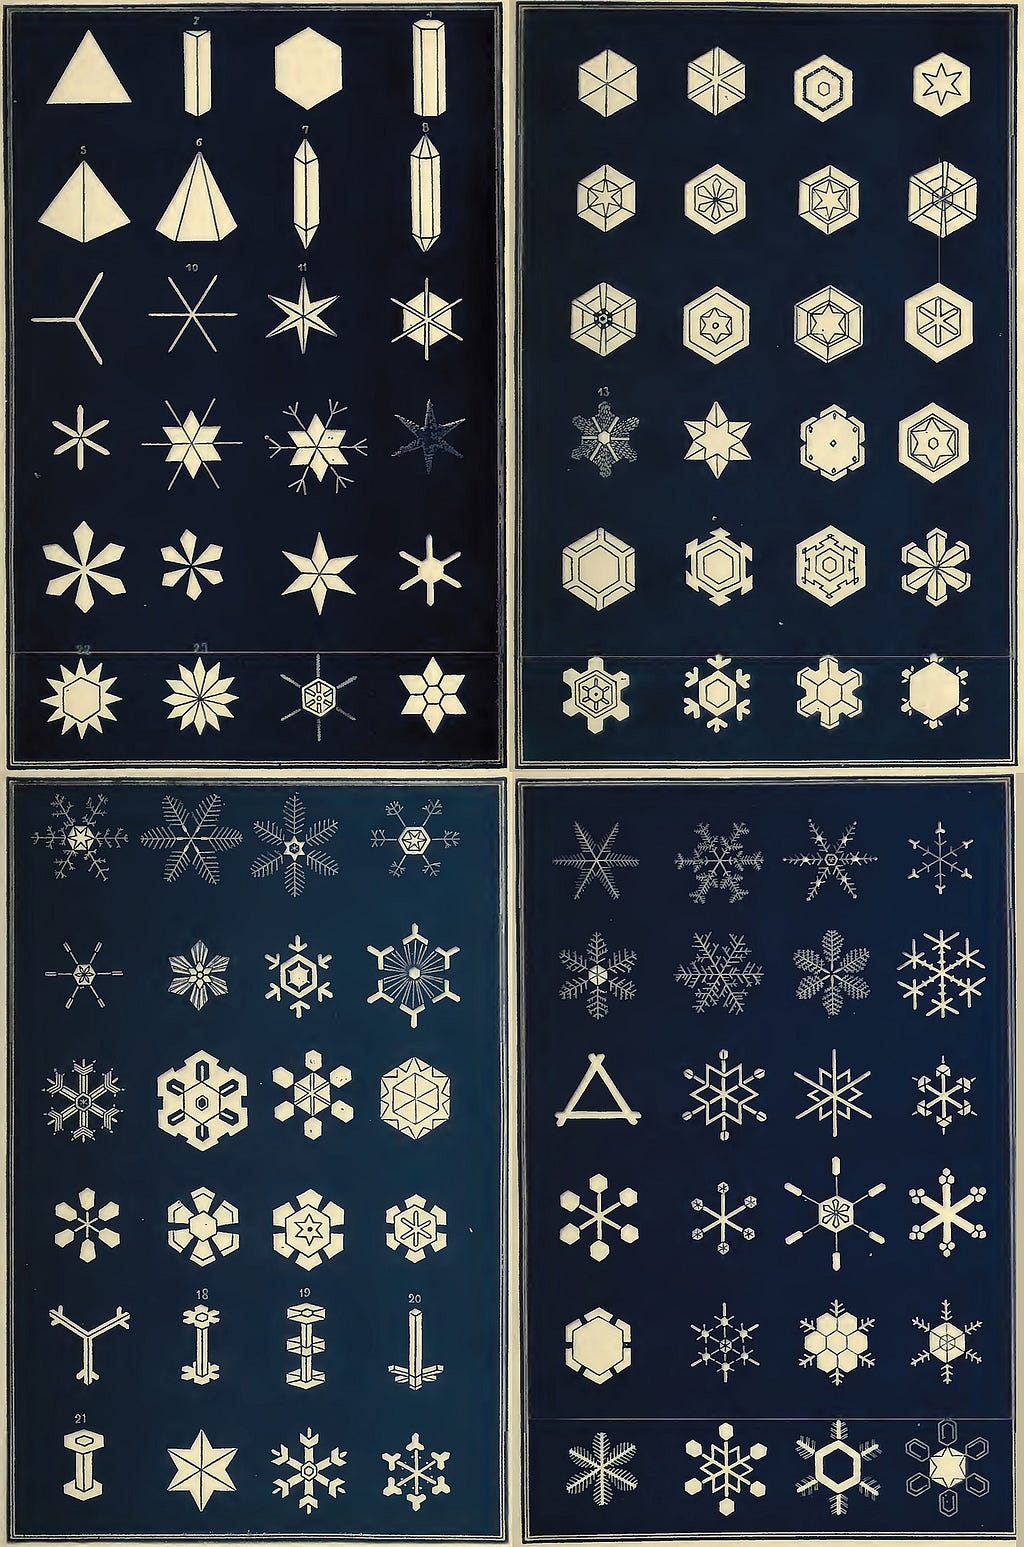 An early classification of snowflakes by Israel Perkins Warren (1863)